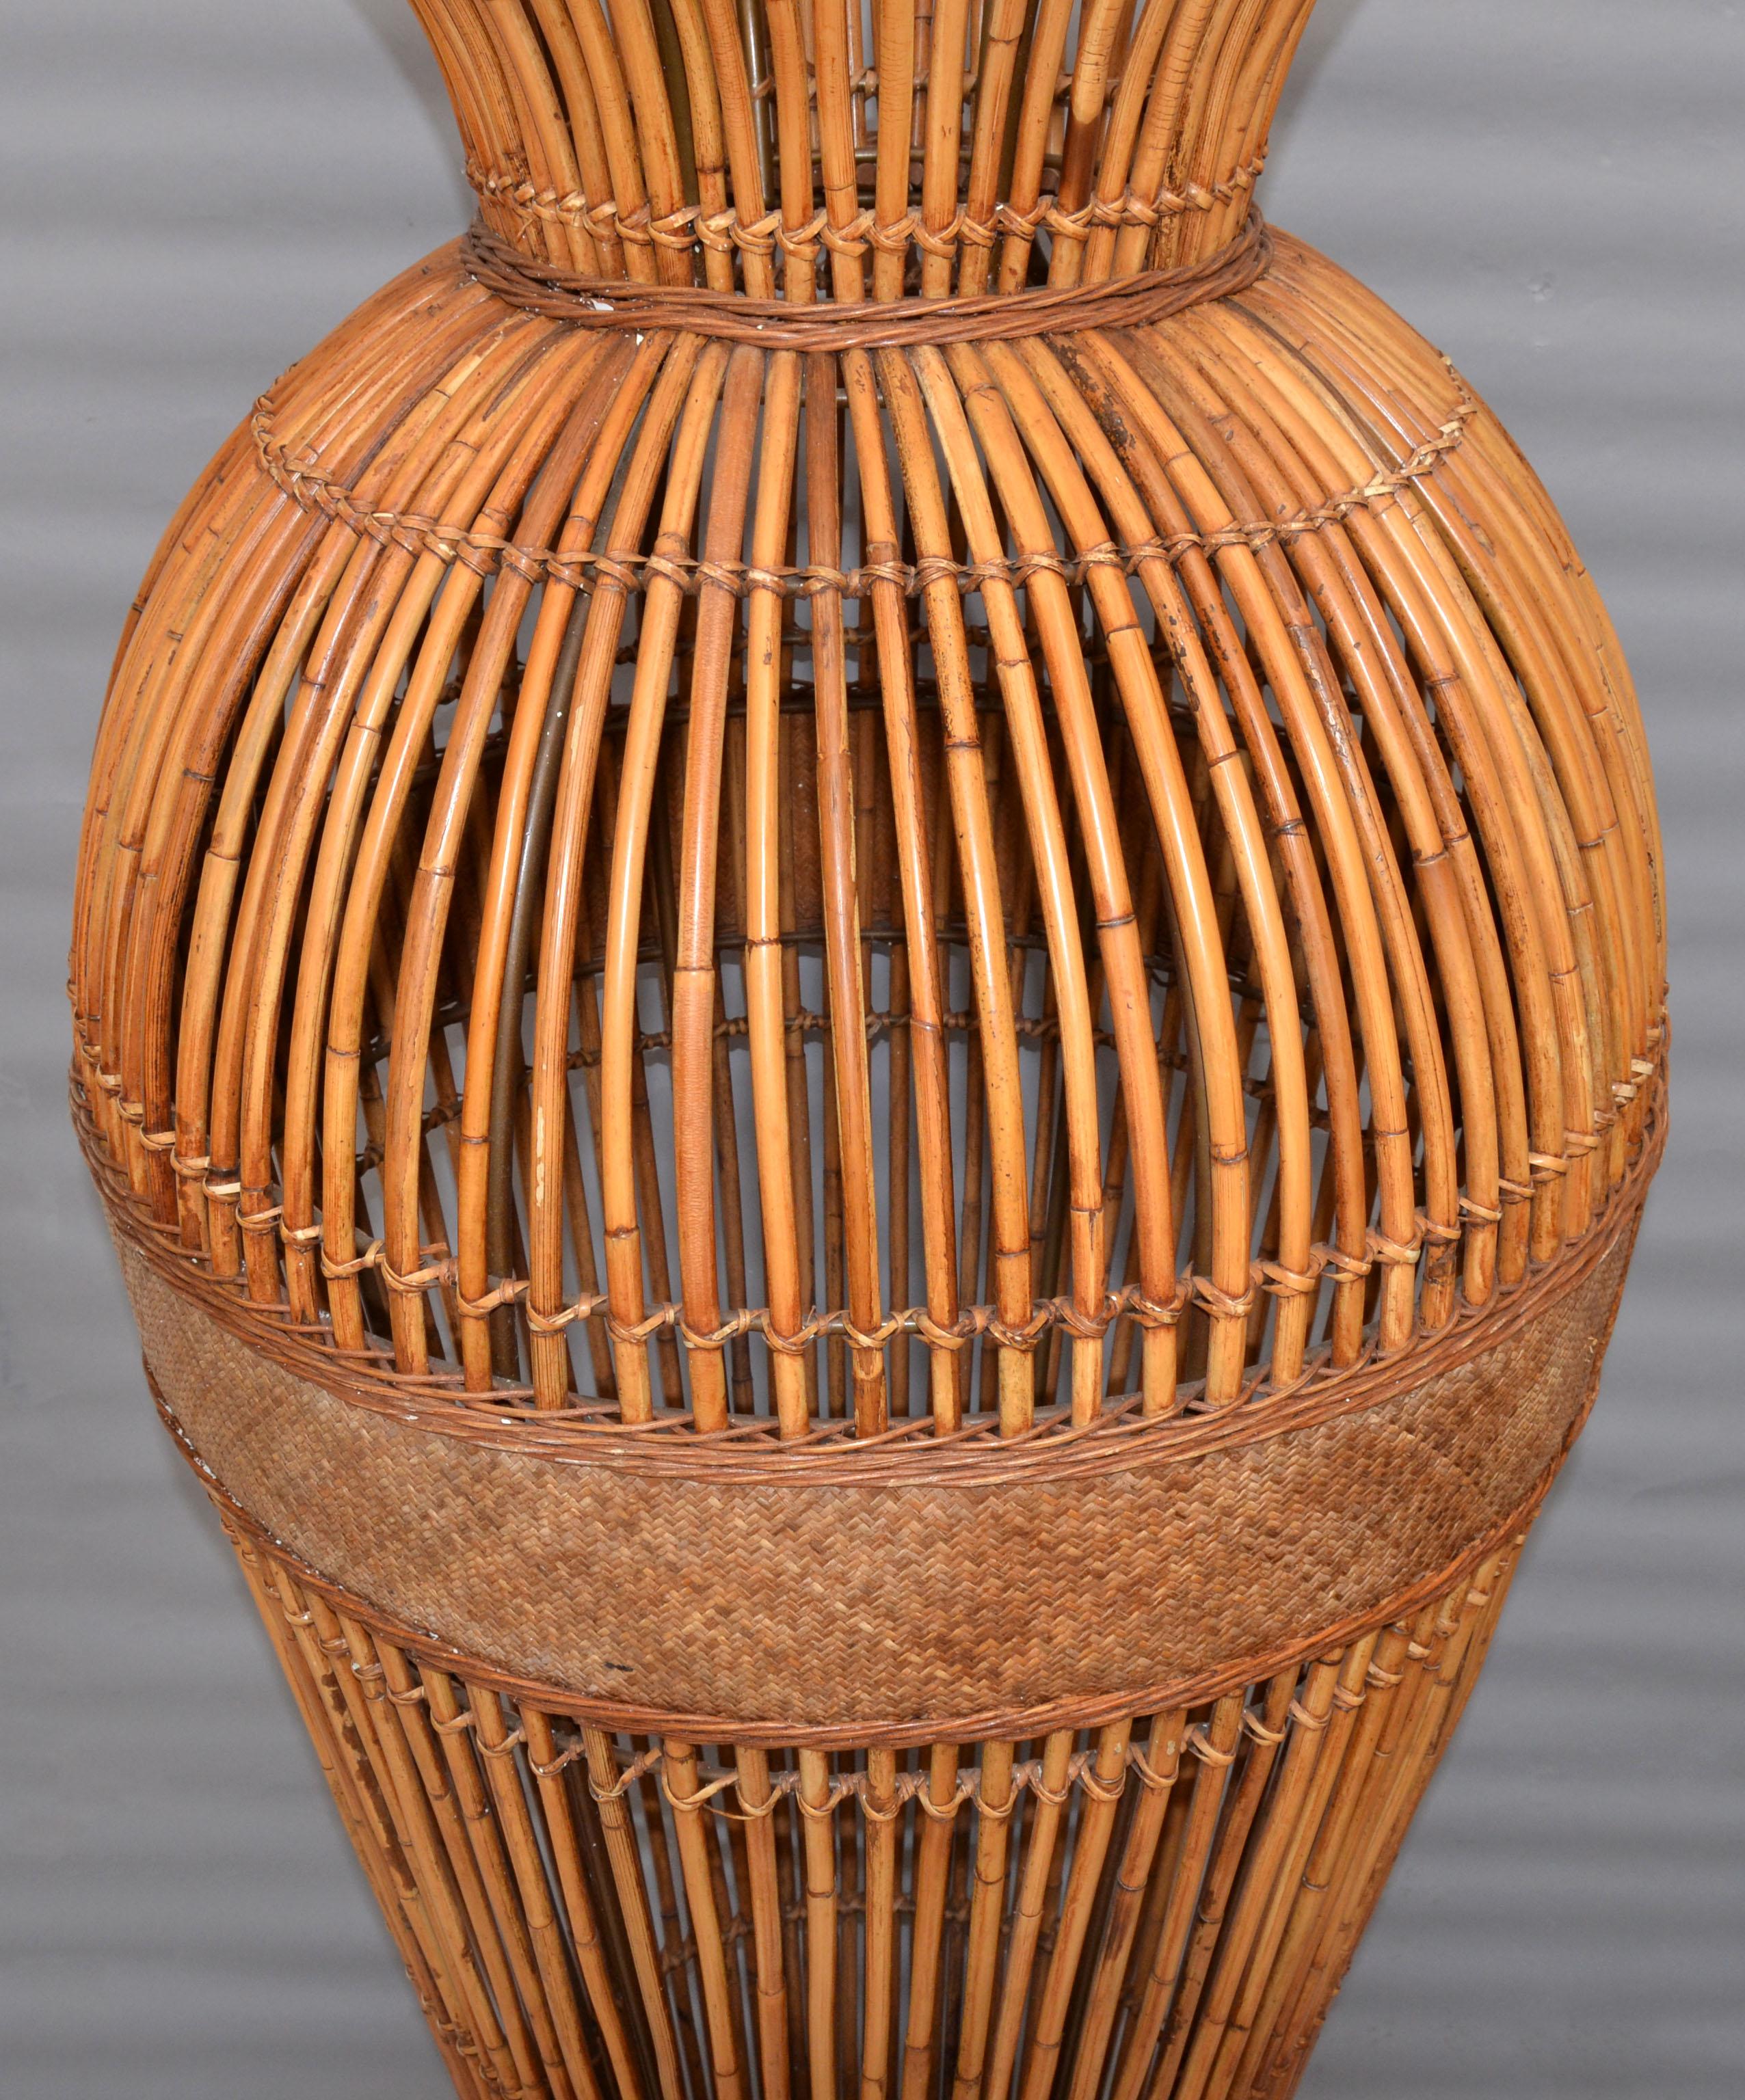 Monumental 6 Feet Mid-Century Modern Handcrafted Bamboo Brass & Cane Floor Vase For Sale 4